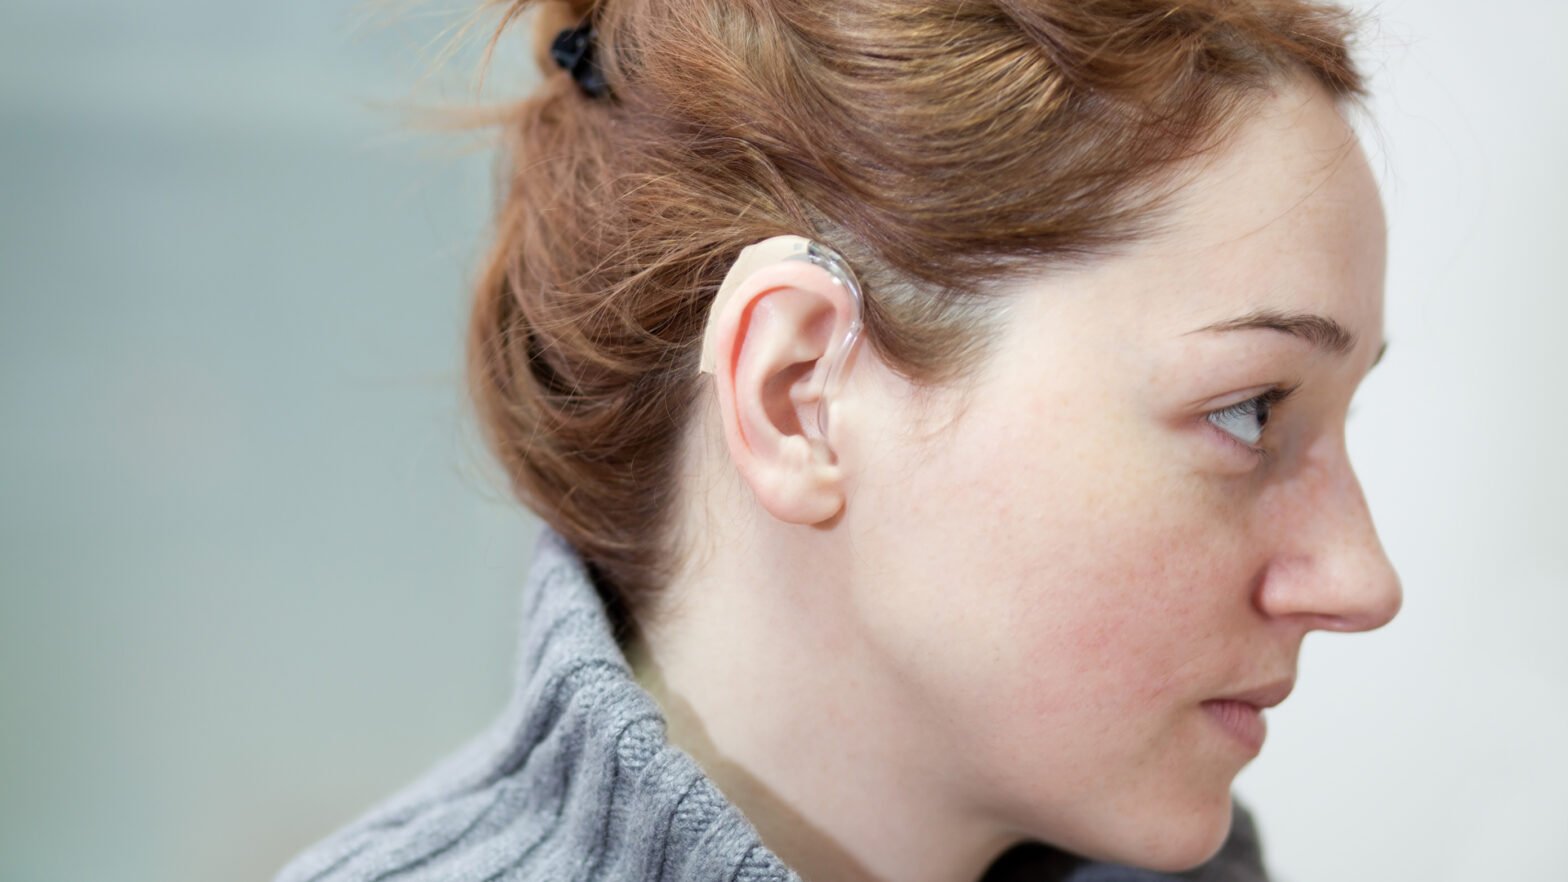 Profile of young woman with a hearing aid